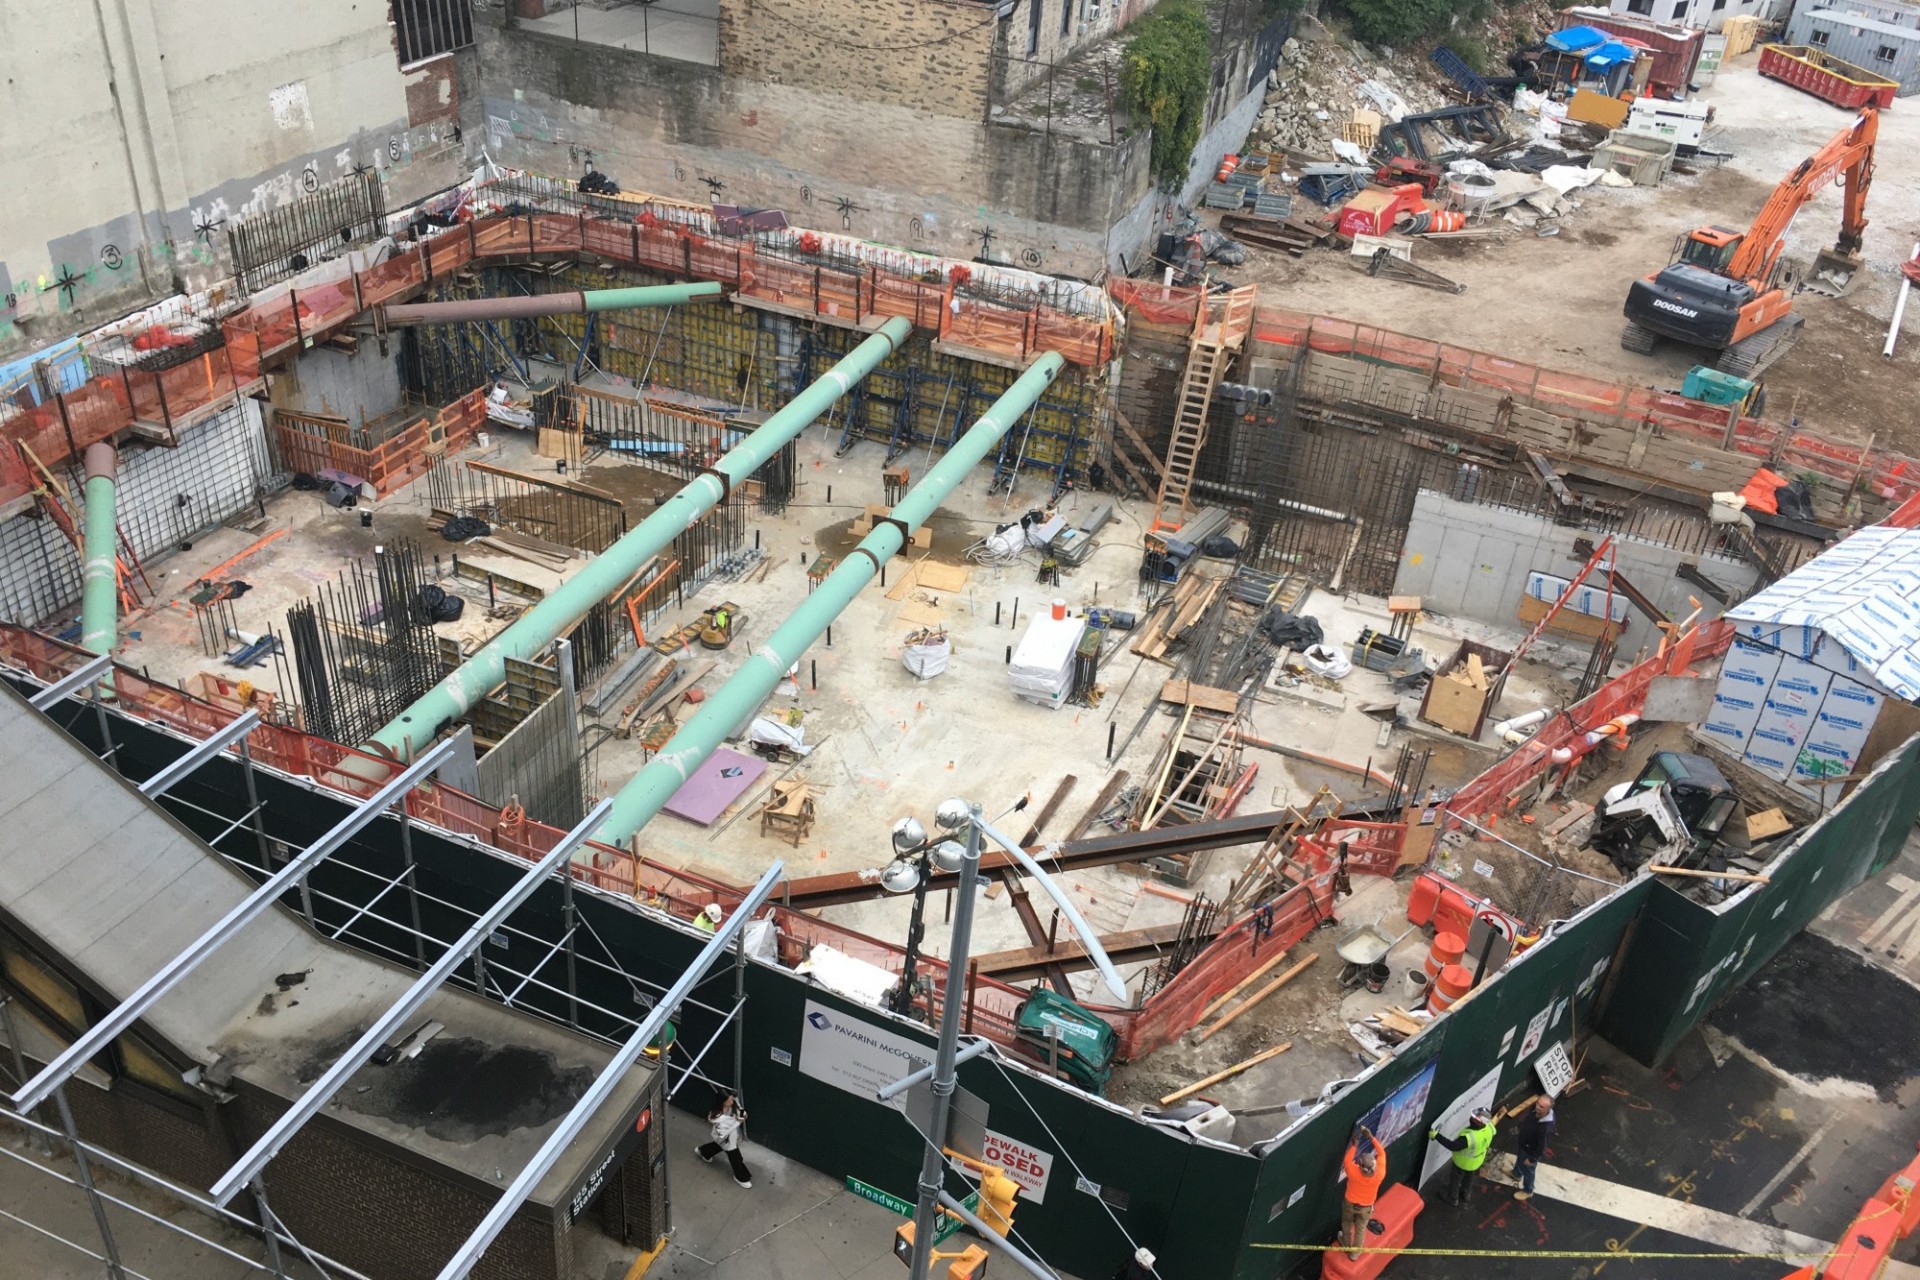 A aerial view of the 600 W. 125th Street construction site, full of materials and large green pipes running overhead.  ﻿